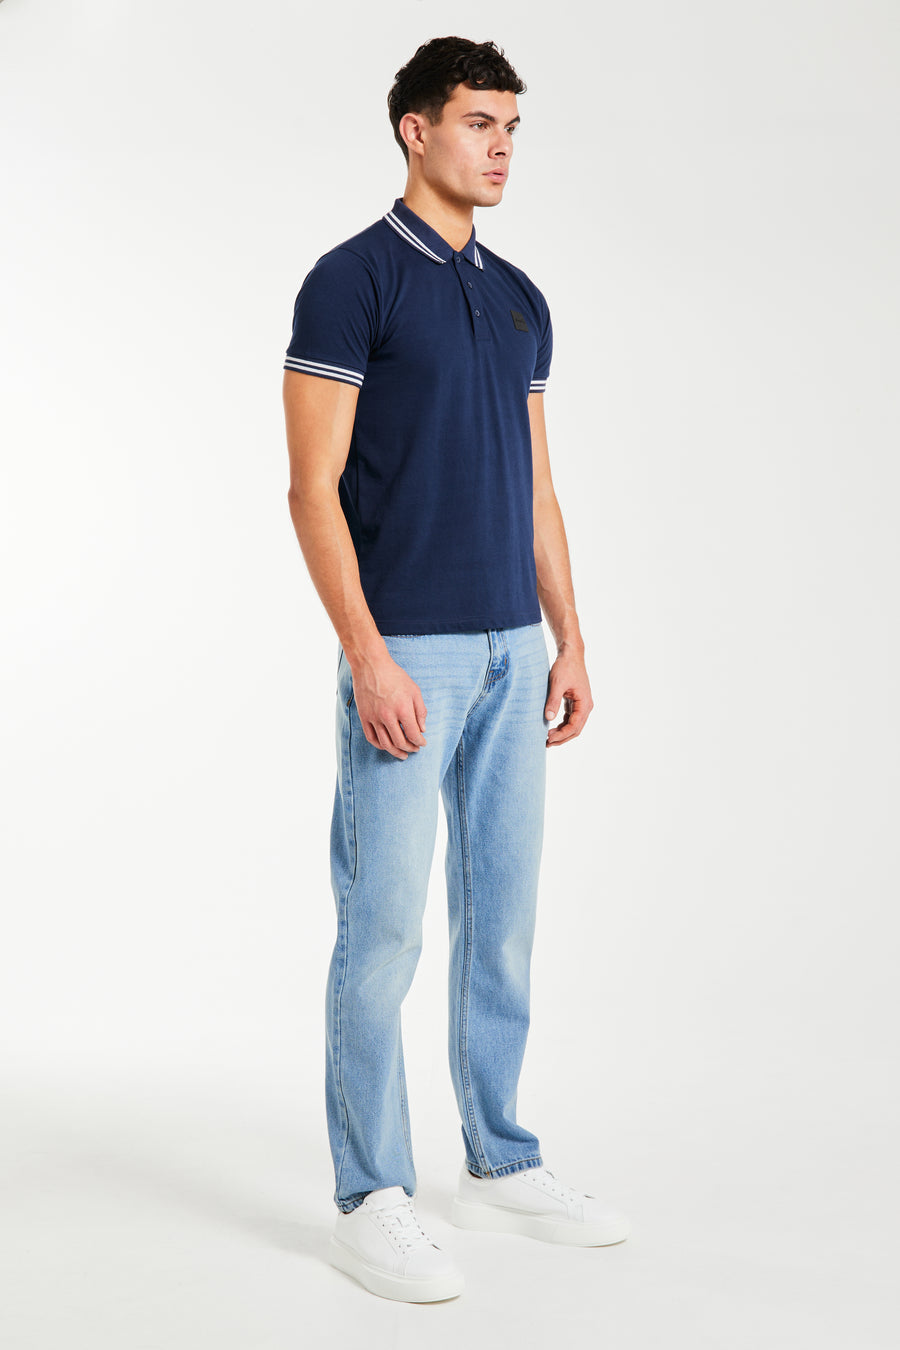 Cheap polo shirts in dark blue and white trim styled with jeans